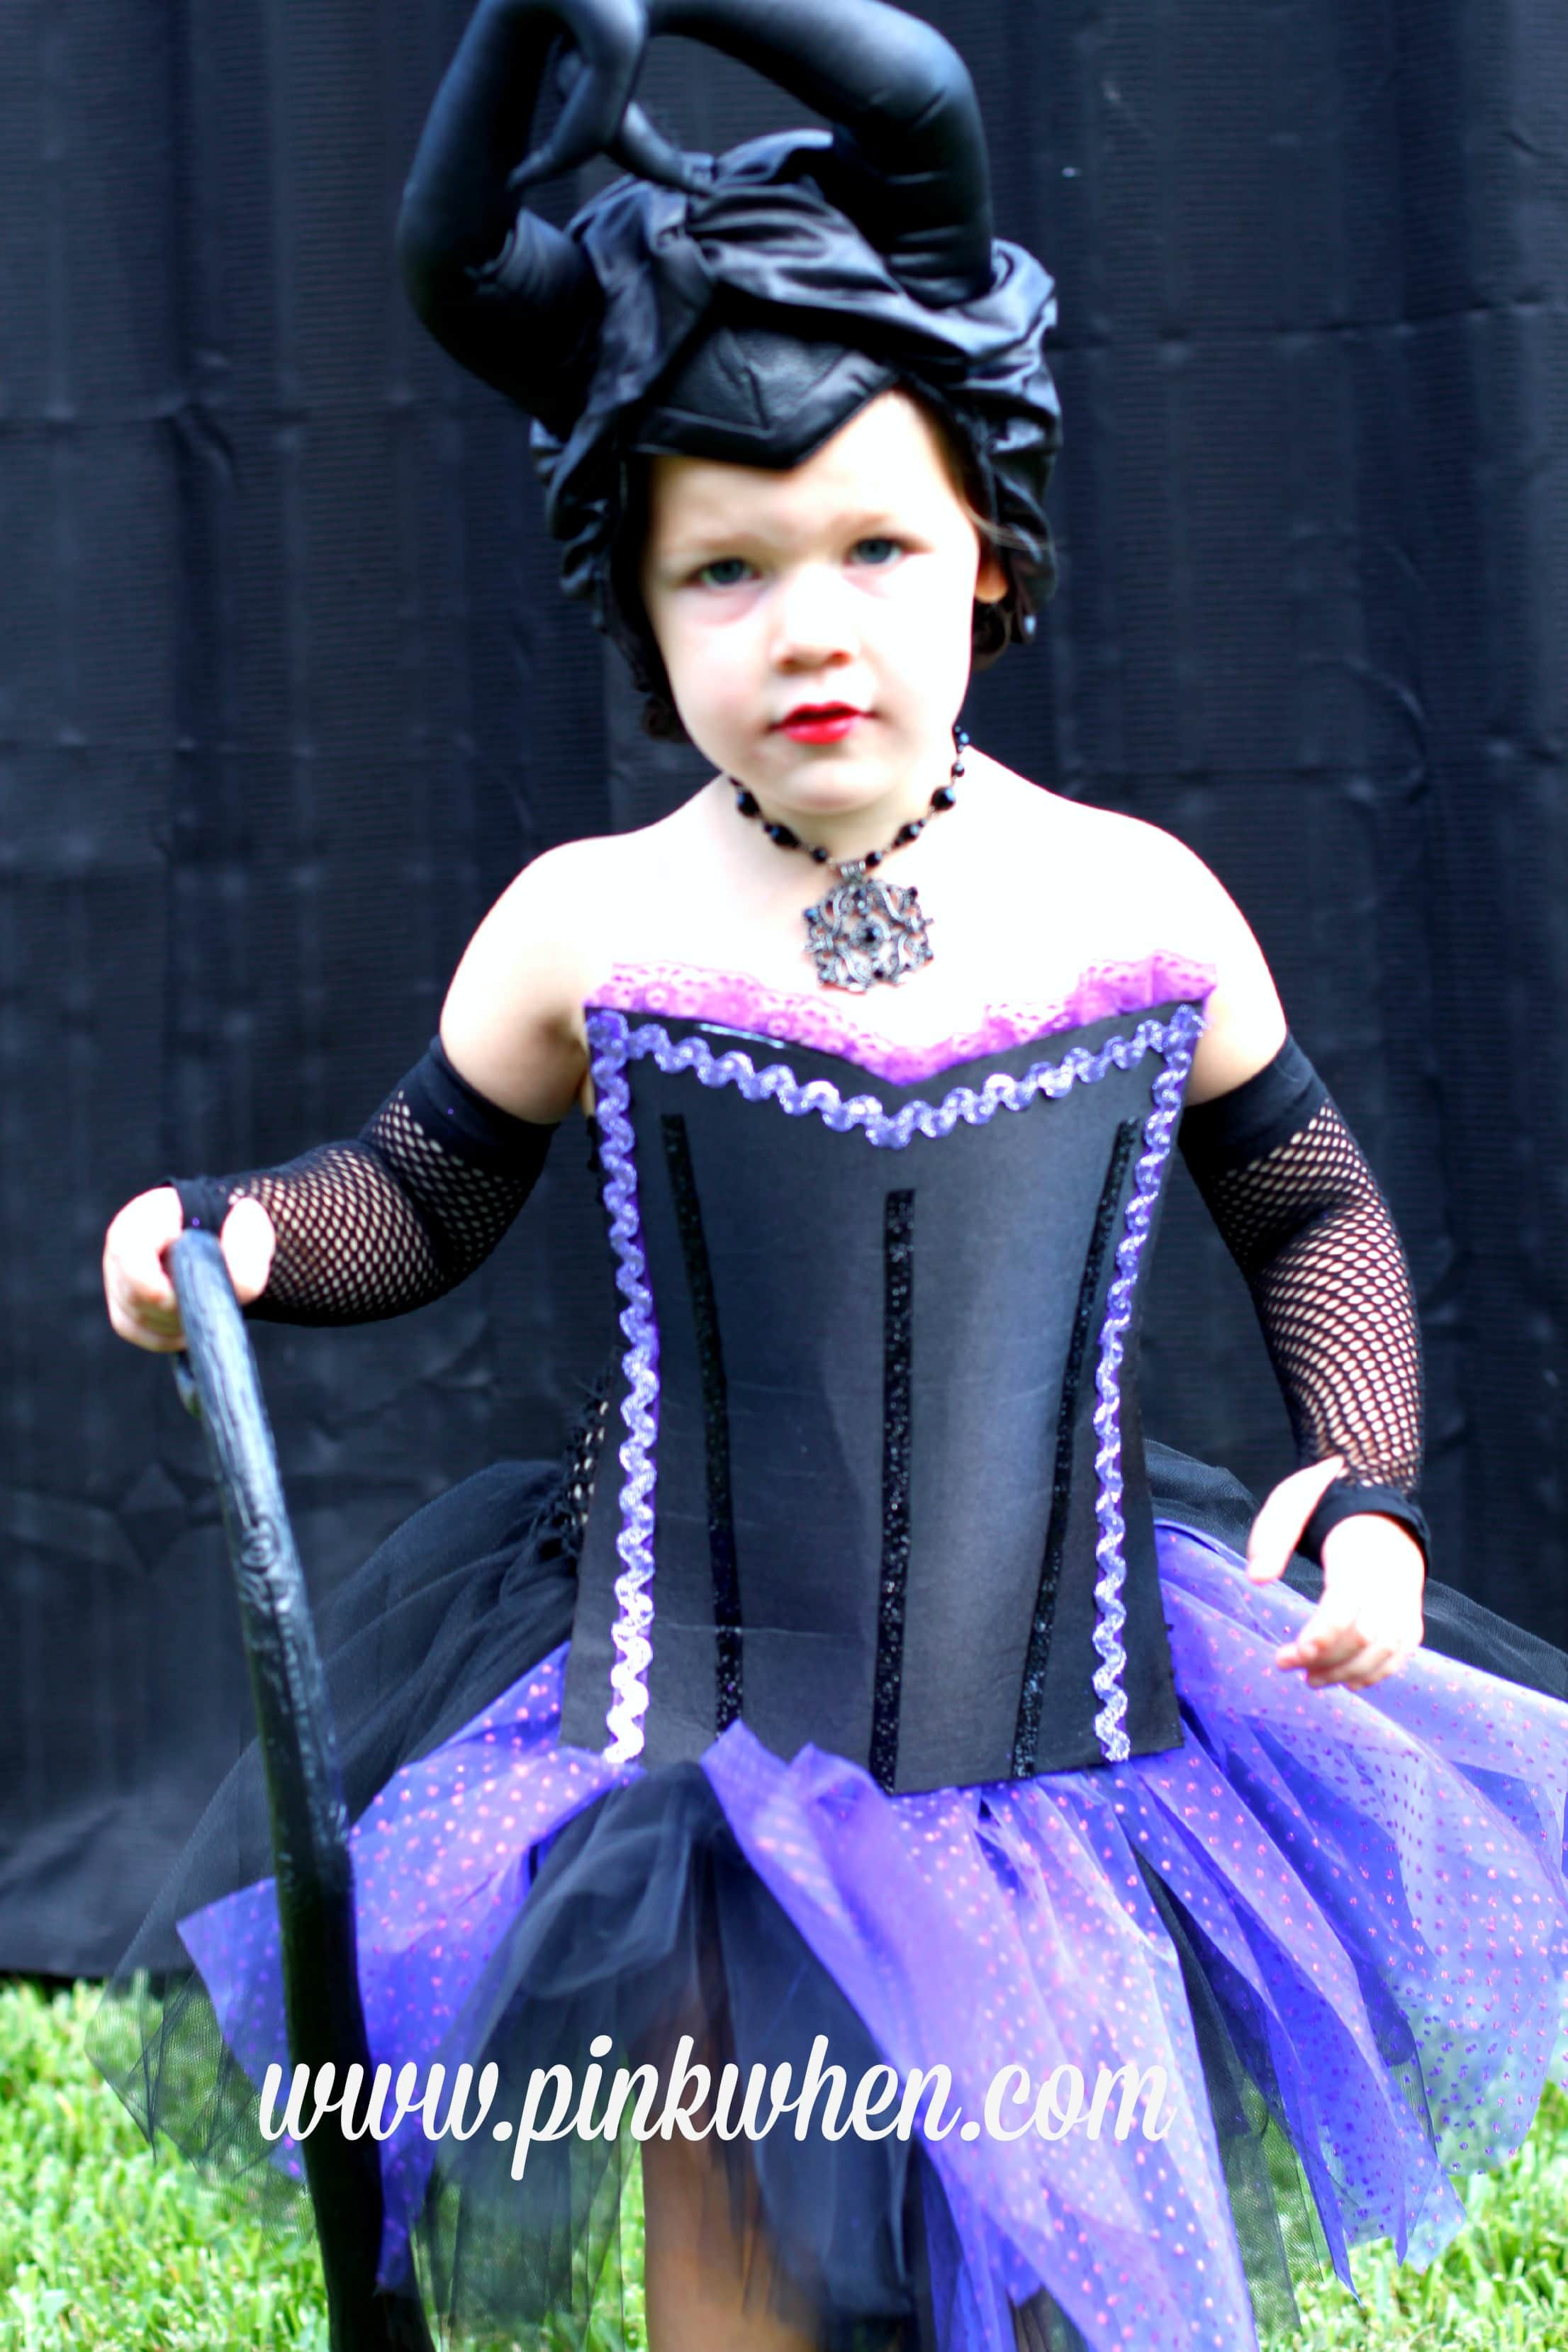 Maleficent DIY Costume
 DIY No Sew Maleficent Costume Page 2 of 2